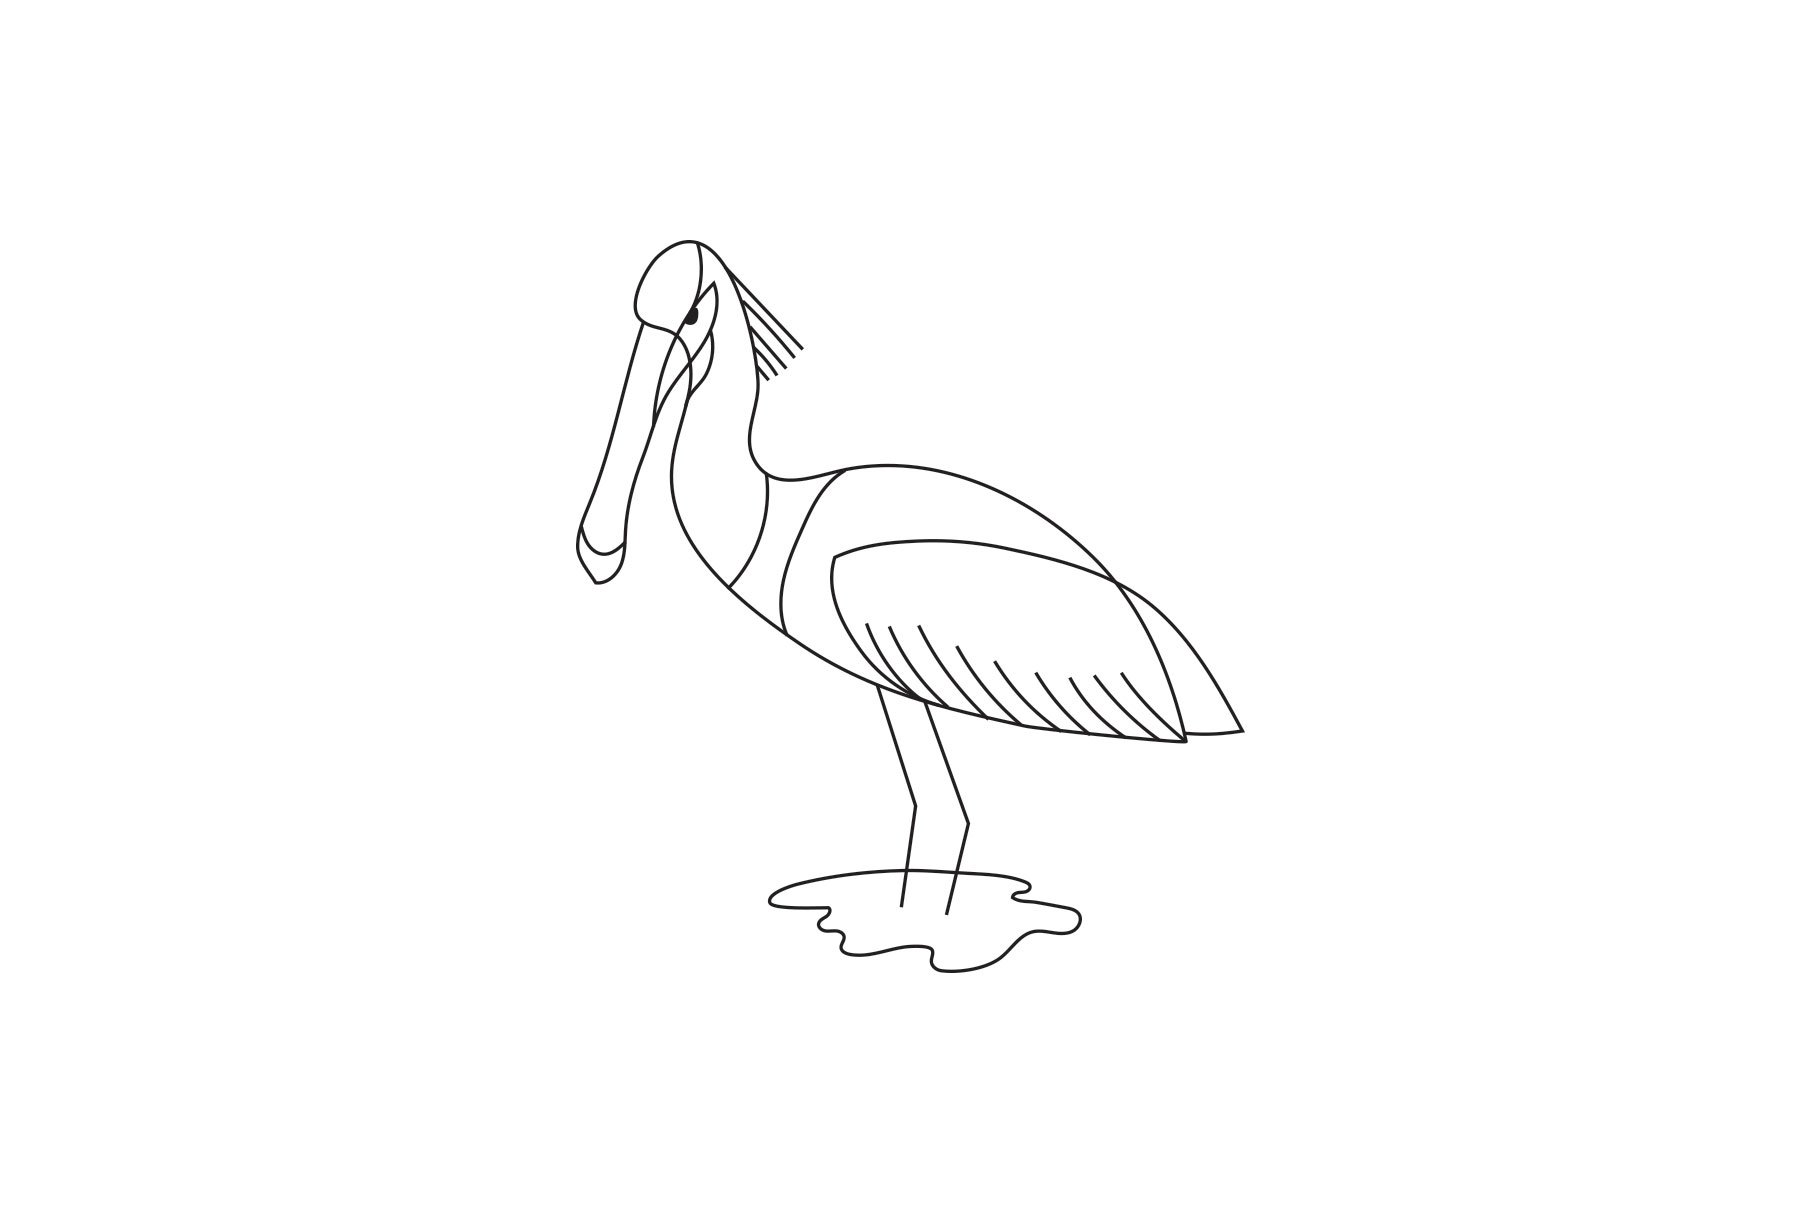 Eurasian Spoonbill preview image.